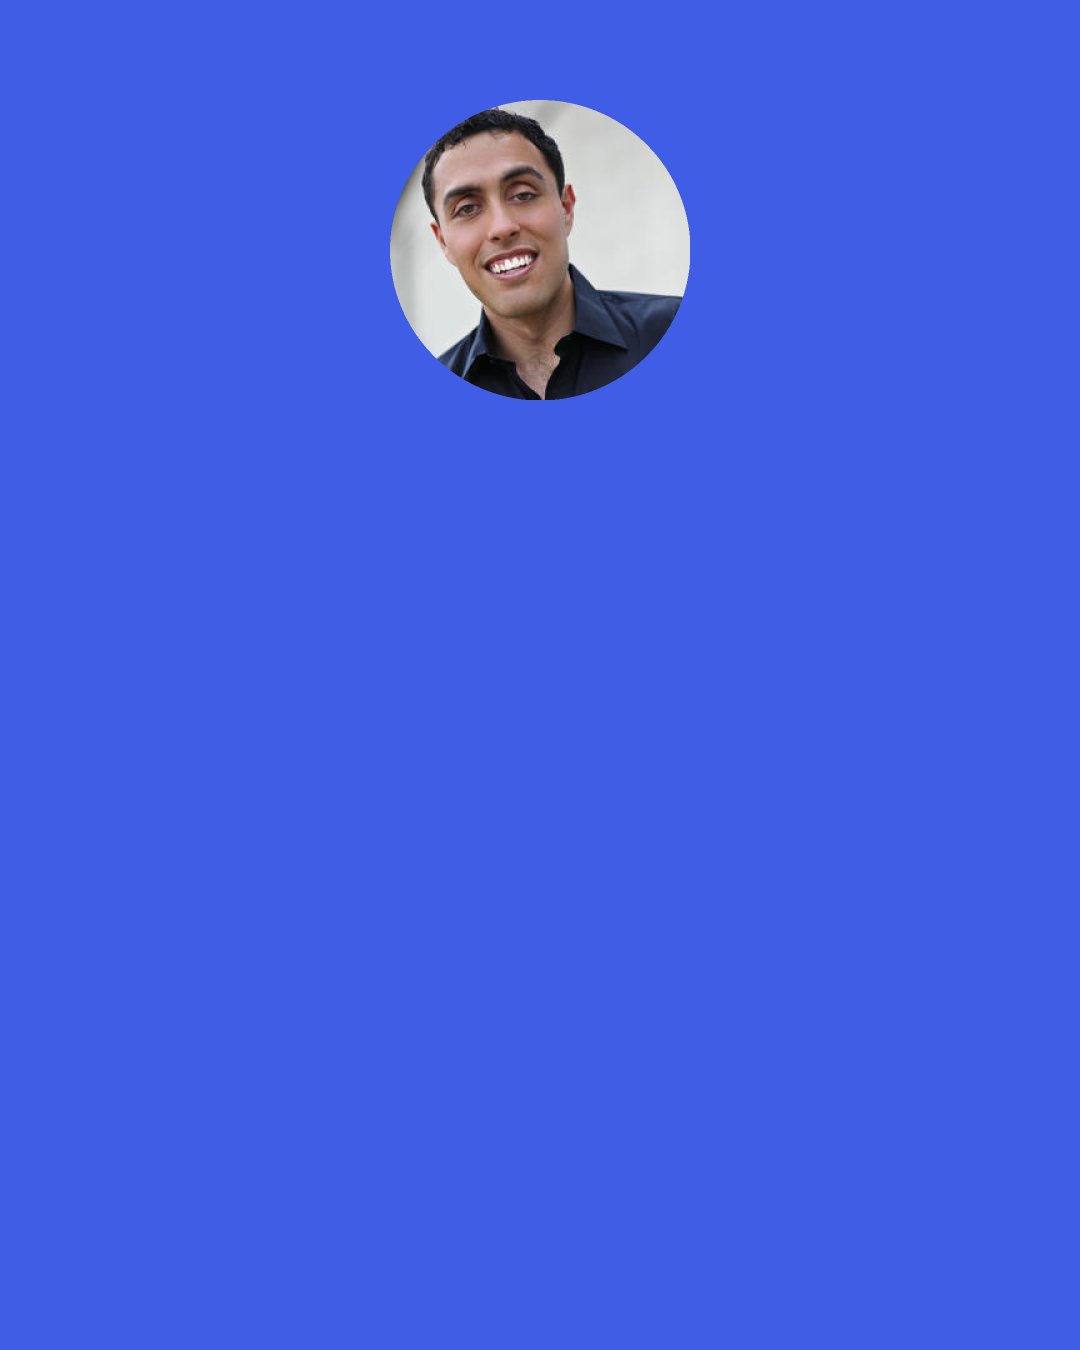 Jairek Robbins: So many people are so busy being busy that they don’t spend time on the foundation of their life.